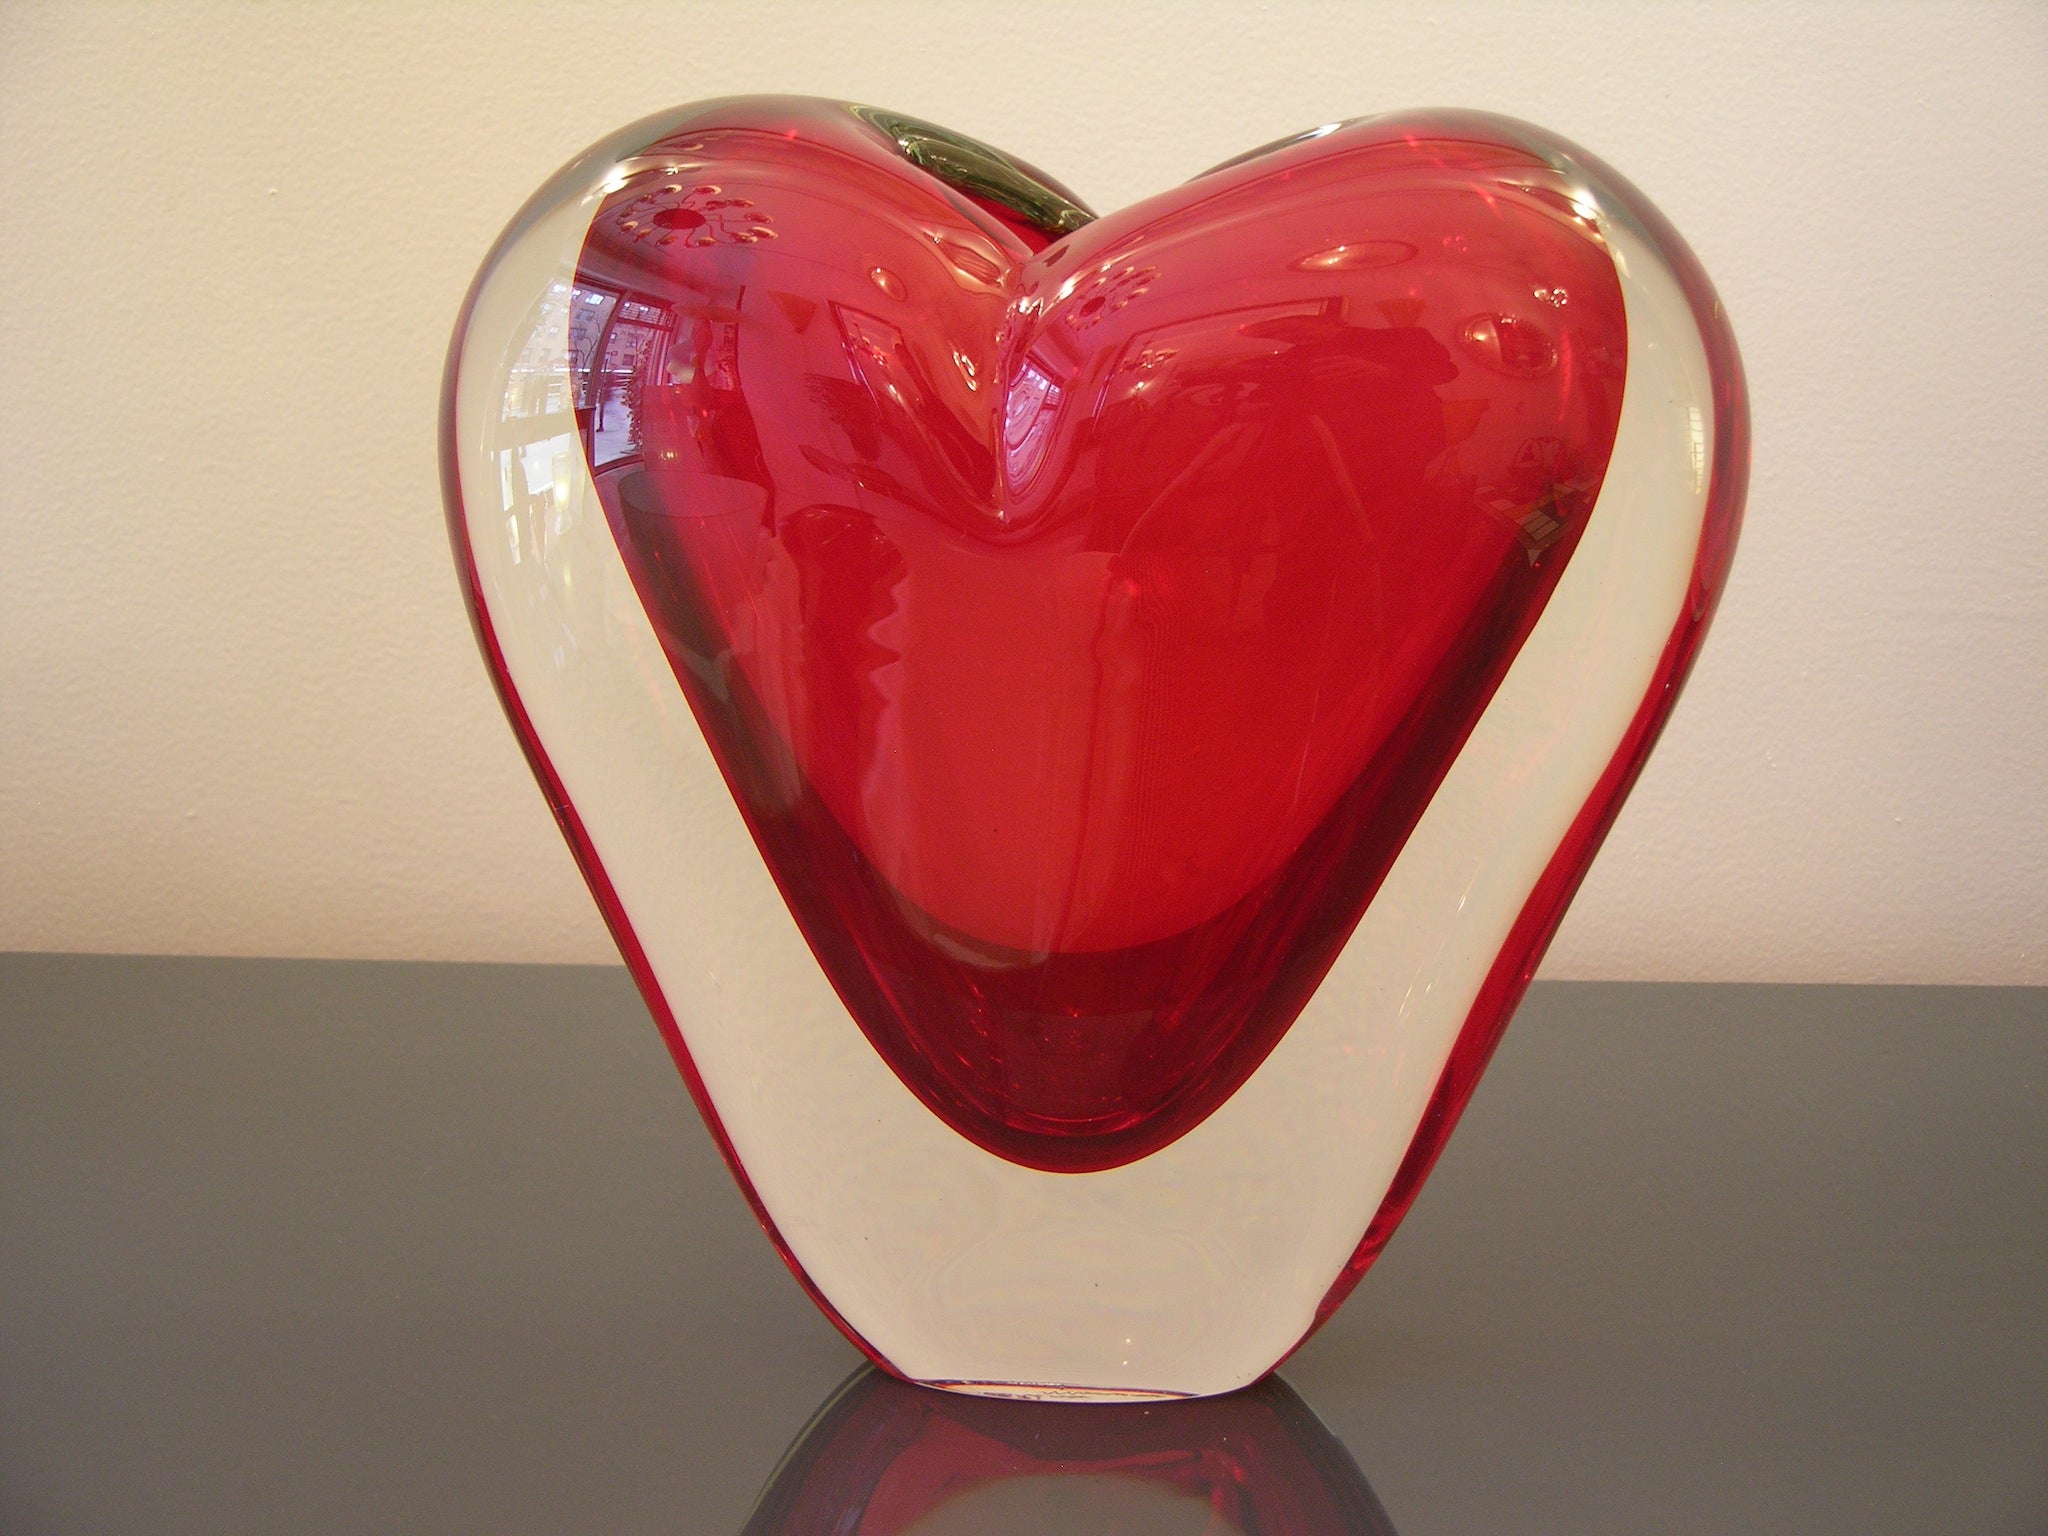 Vintage Murano Heart-Shaped Vase By Colizza 